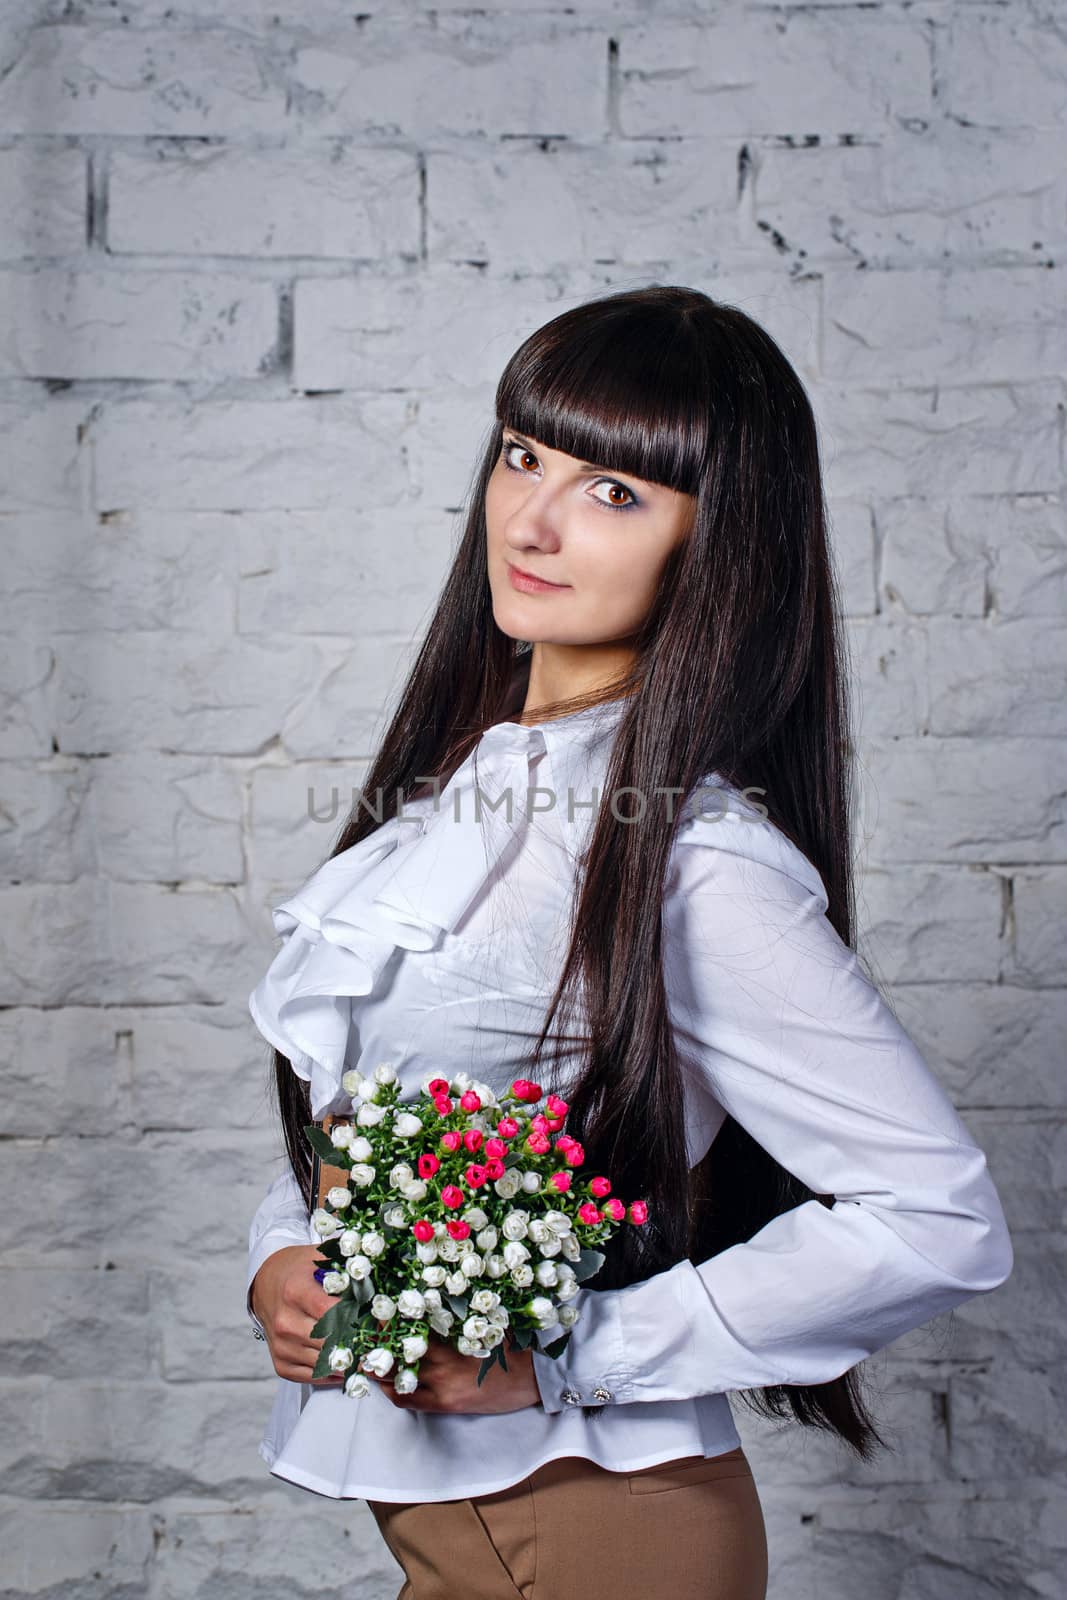 Girl with bouquet of flowers by Vagengeym